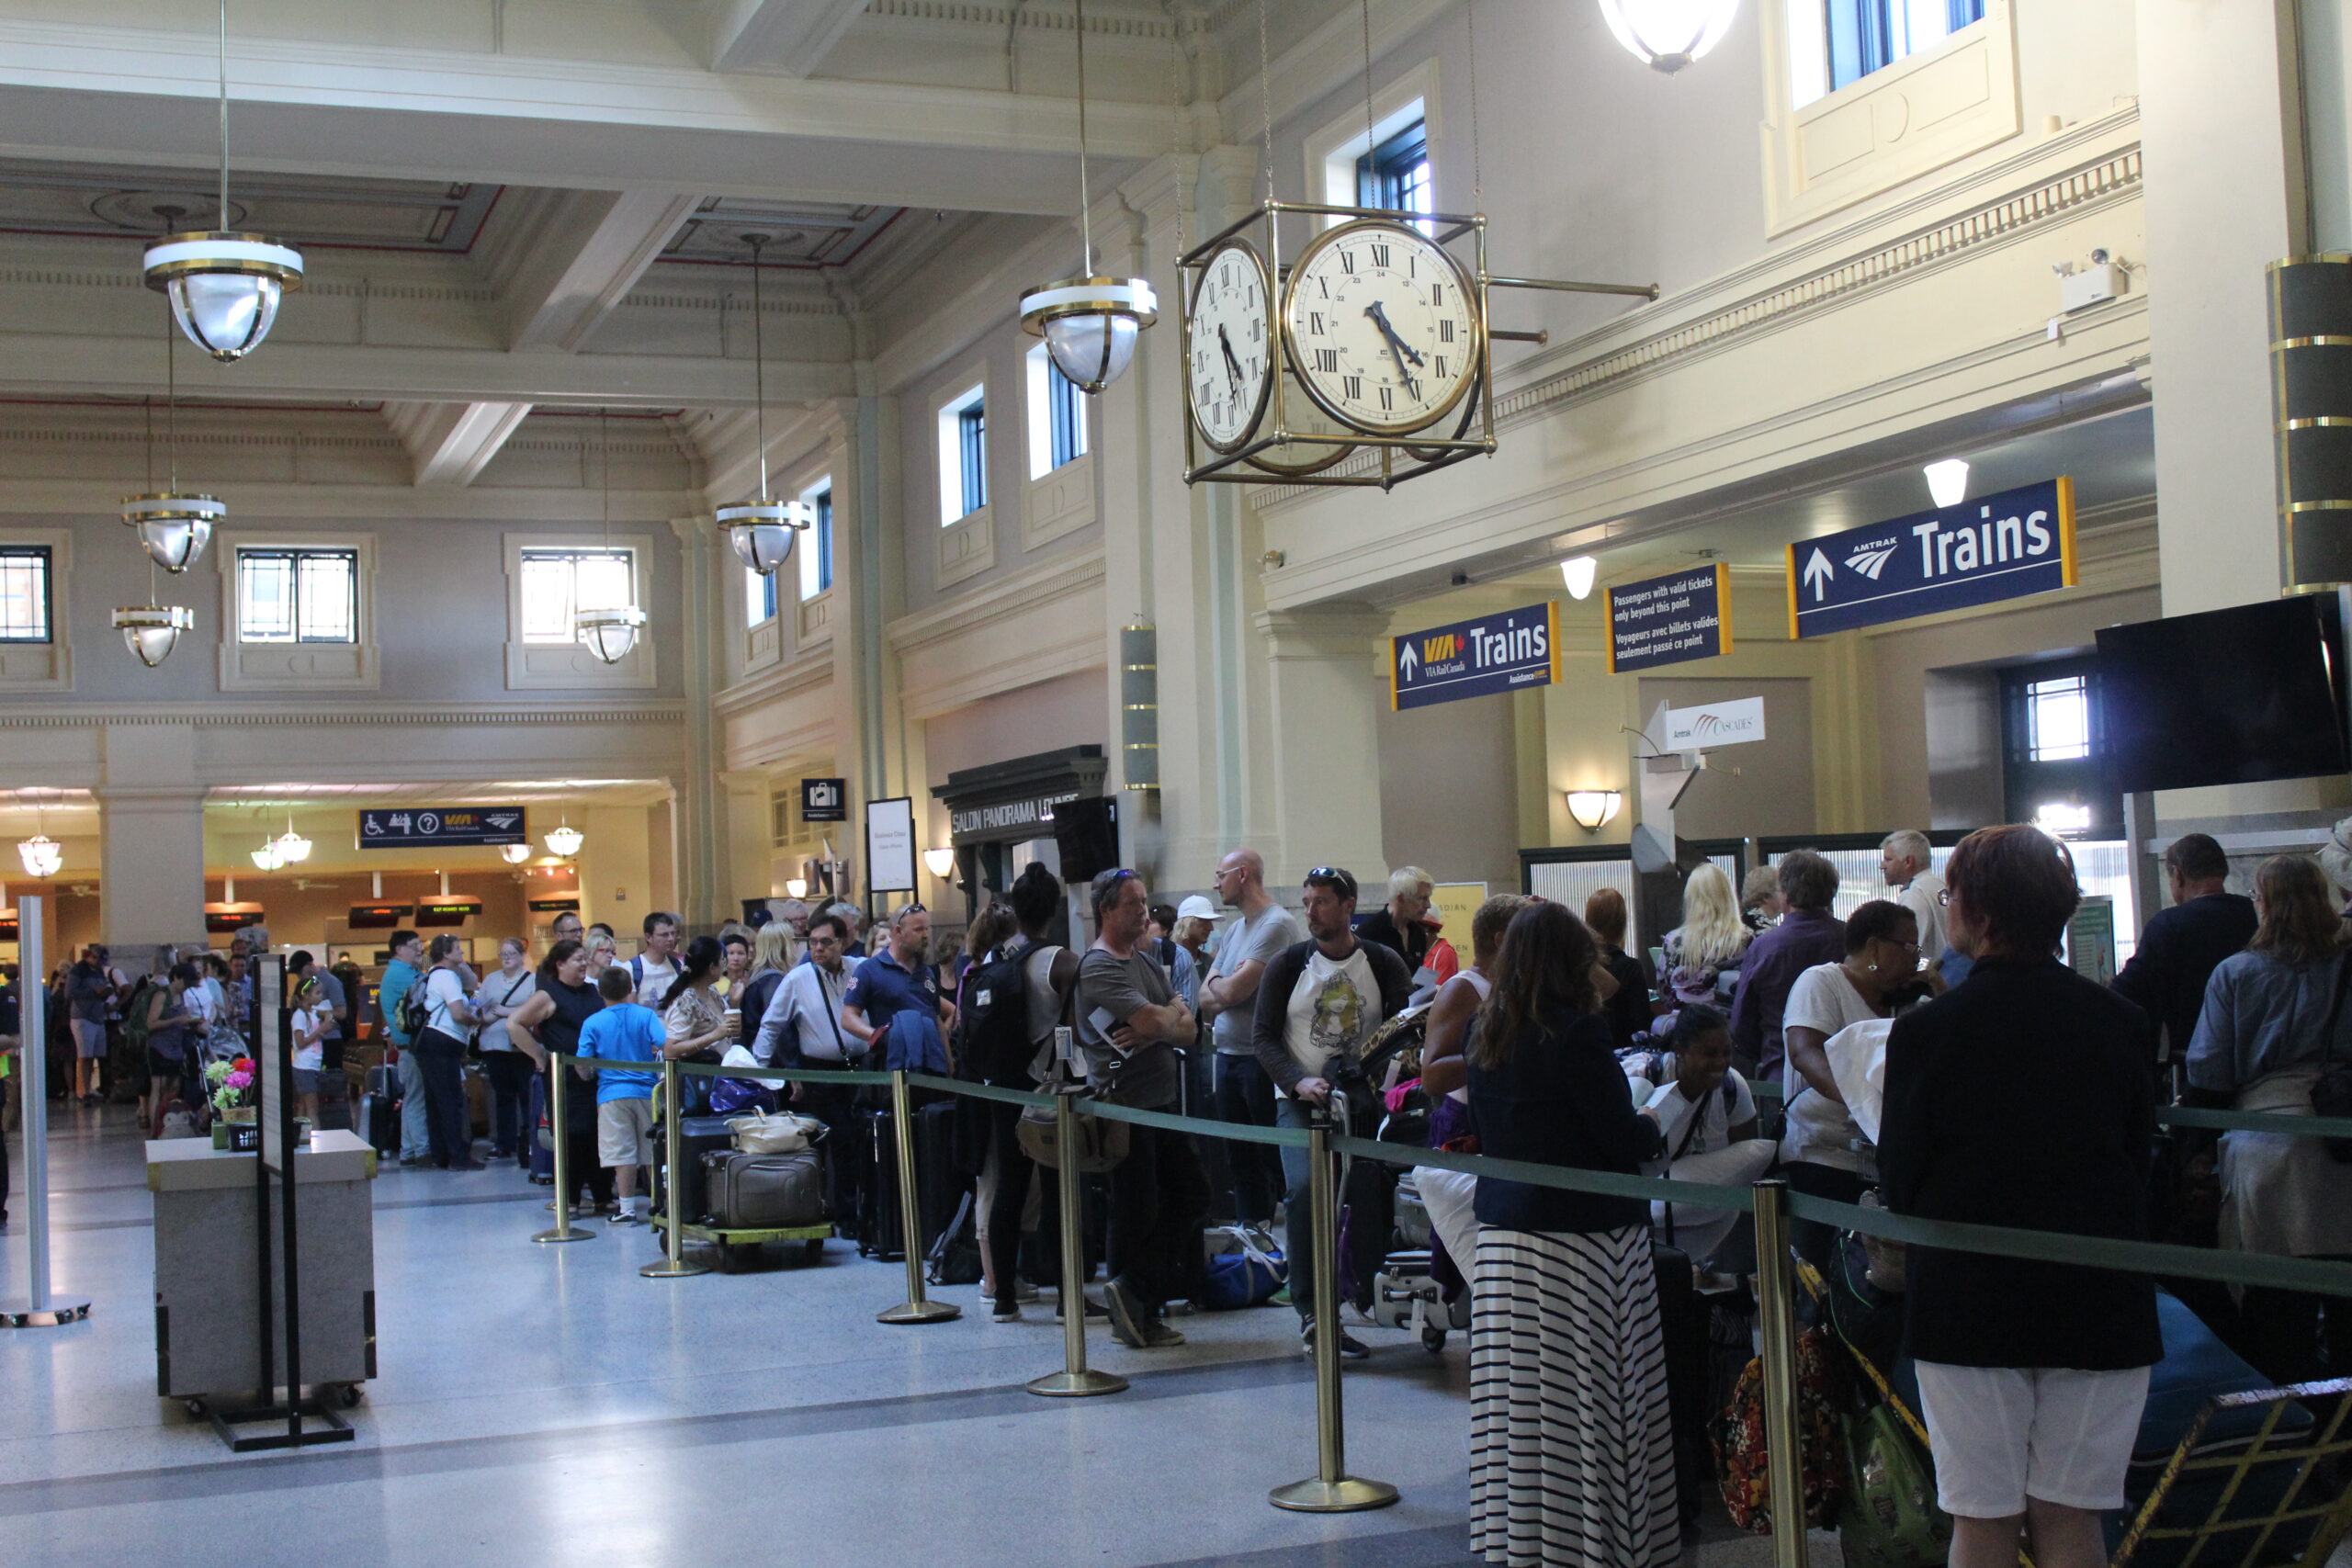 Passengers waiting in line at a train station